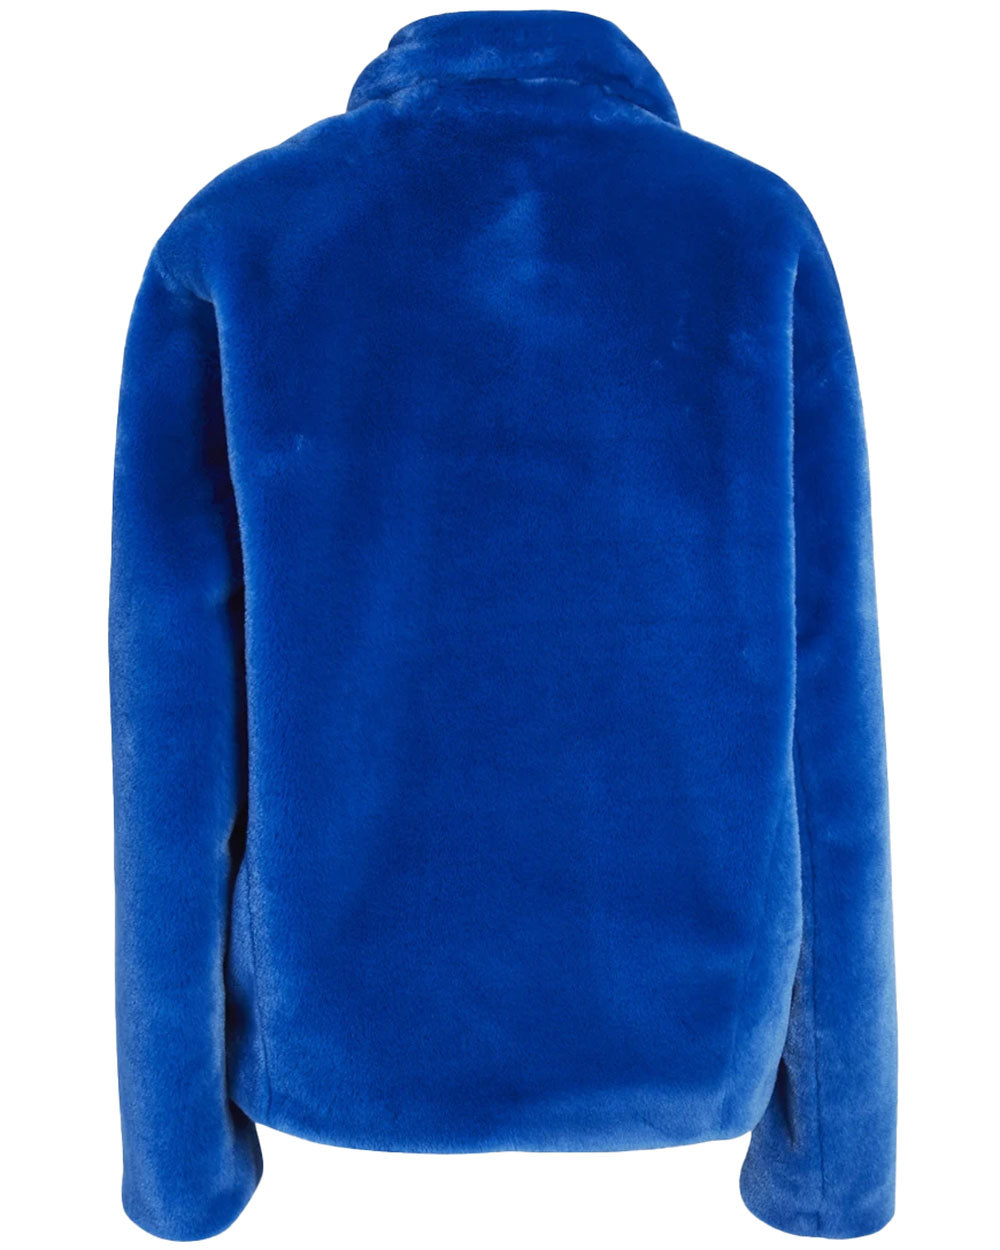 Reese Jacket in Magnetic Blue